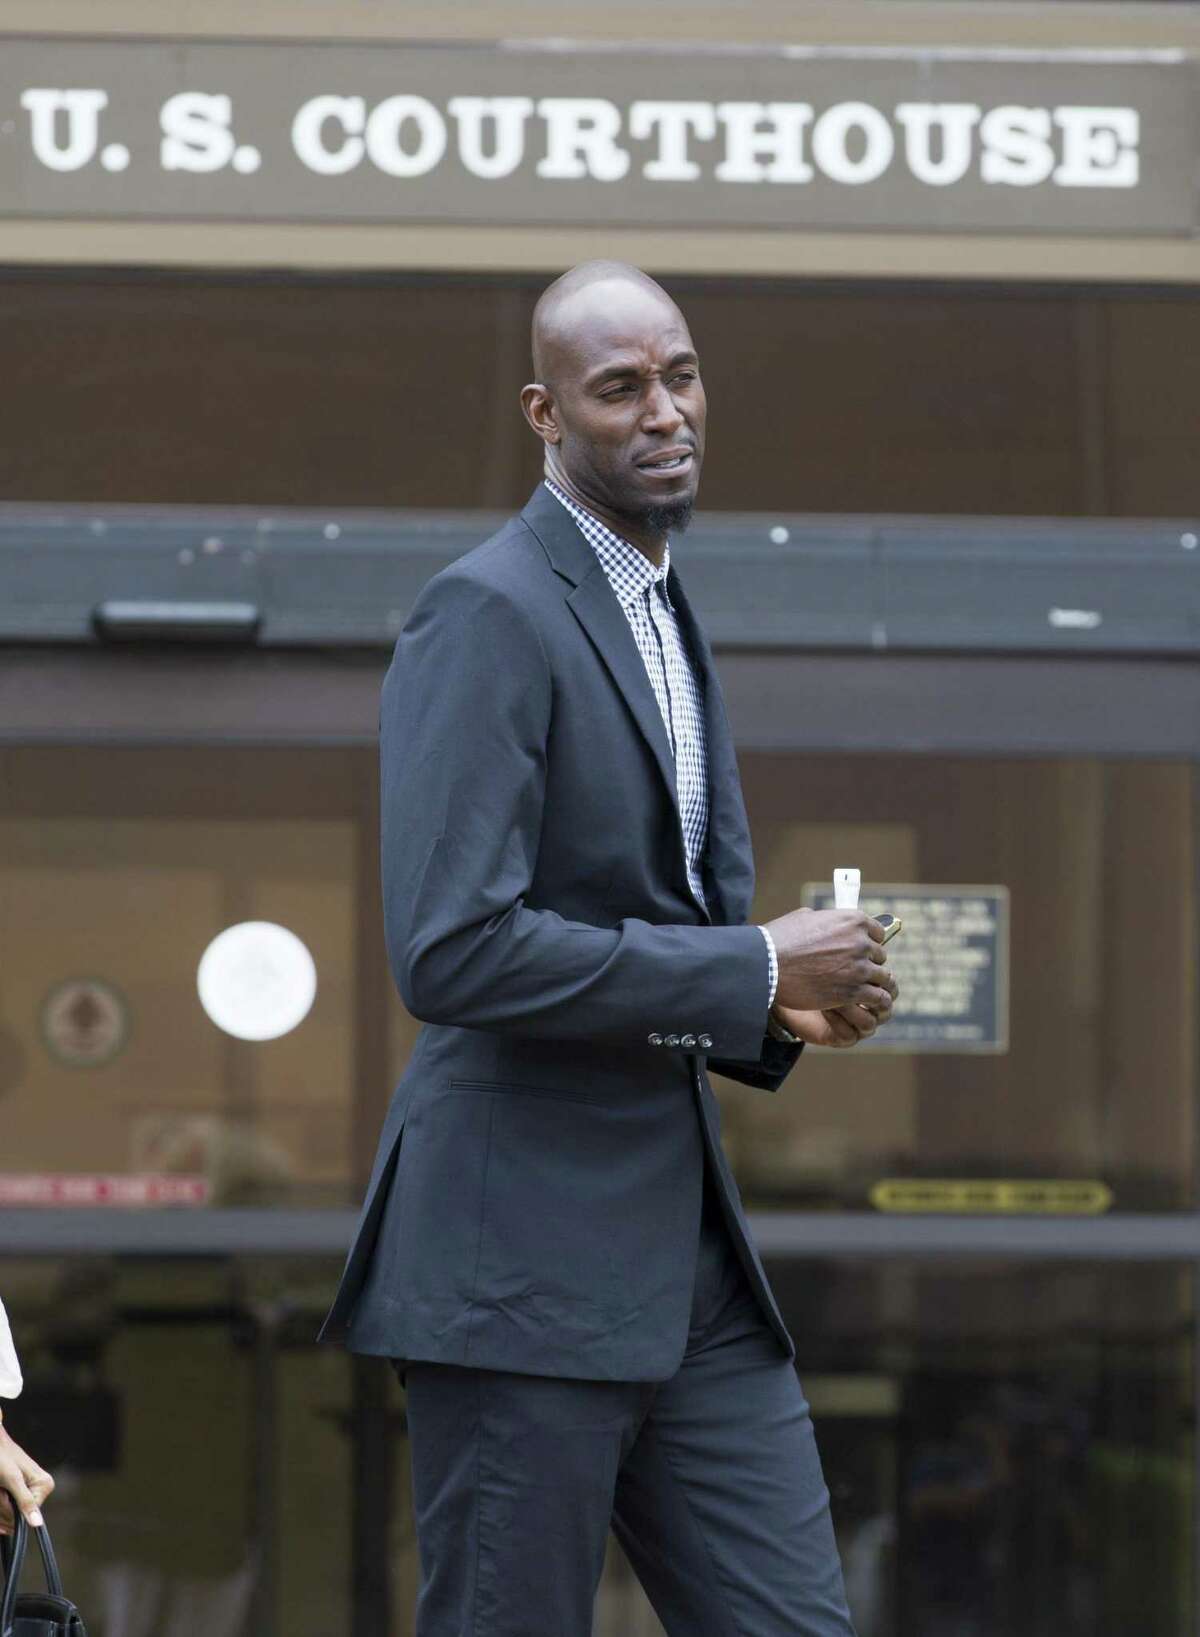 Former NBA star Kevin Garnett leaves the federal courthouse in San Antonio in June 2017 after attending a hearing in Tim Duncan’s legal case against Duncan’s former financial adviser Charles Banks. A lawsuit against Garnett’s former accountant says the retired player learned of financial losses after Banks was sentenced to four years in federal prison defrauding more than $7 million from Duncan.